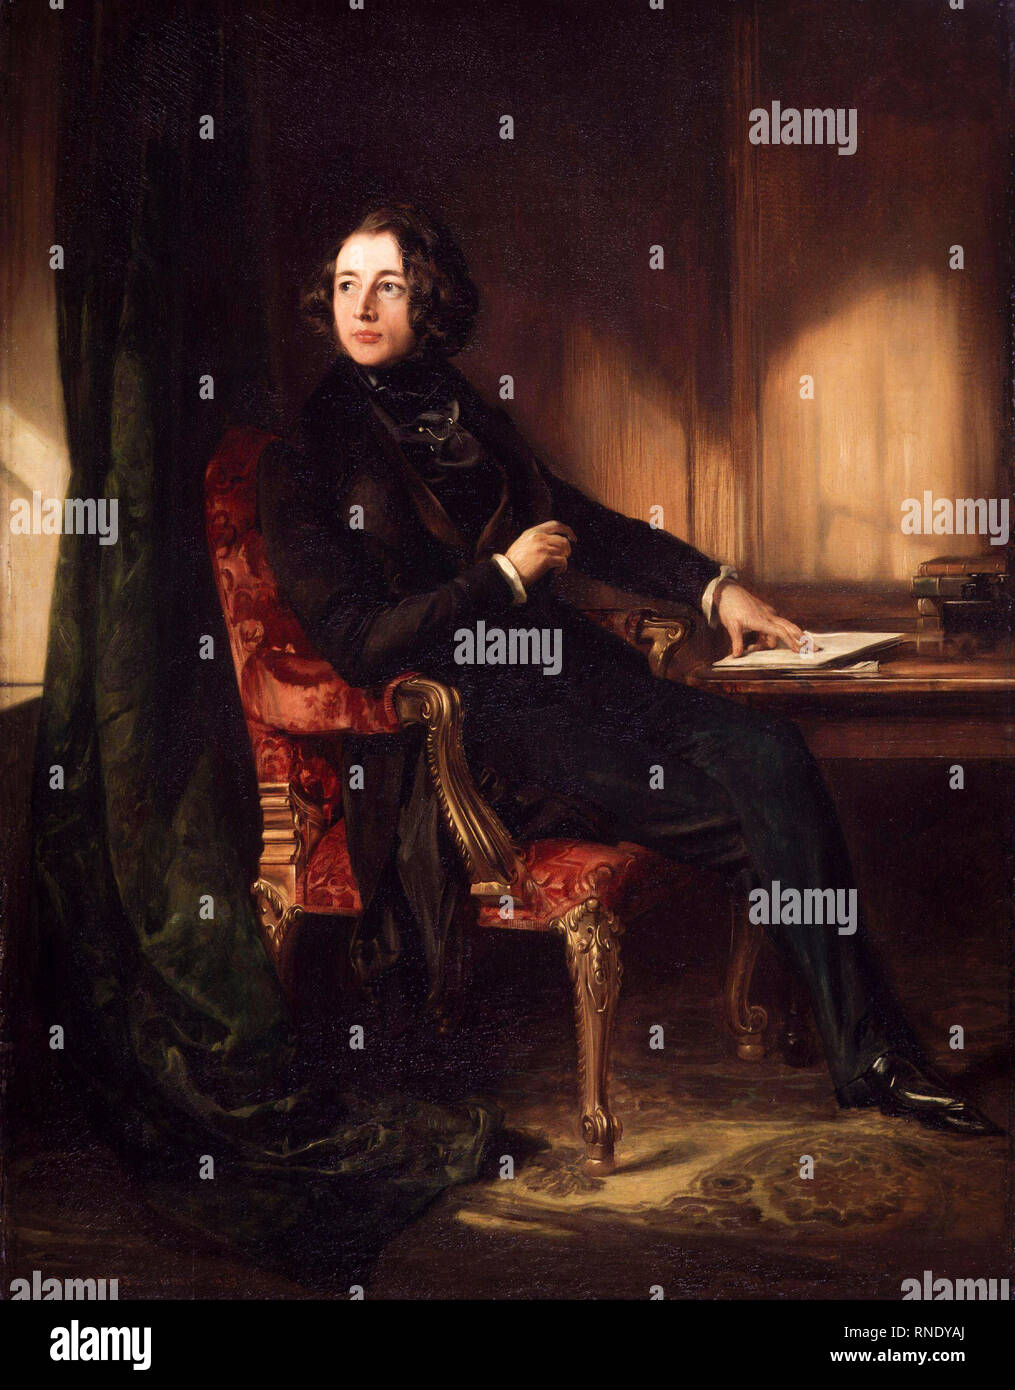 Charles Dickens as a young man, portrait painting in oil on canvas by Daniel Maclise, 1839 Stock Photo